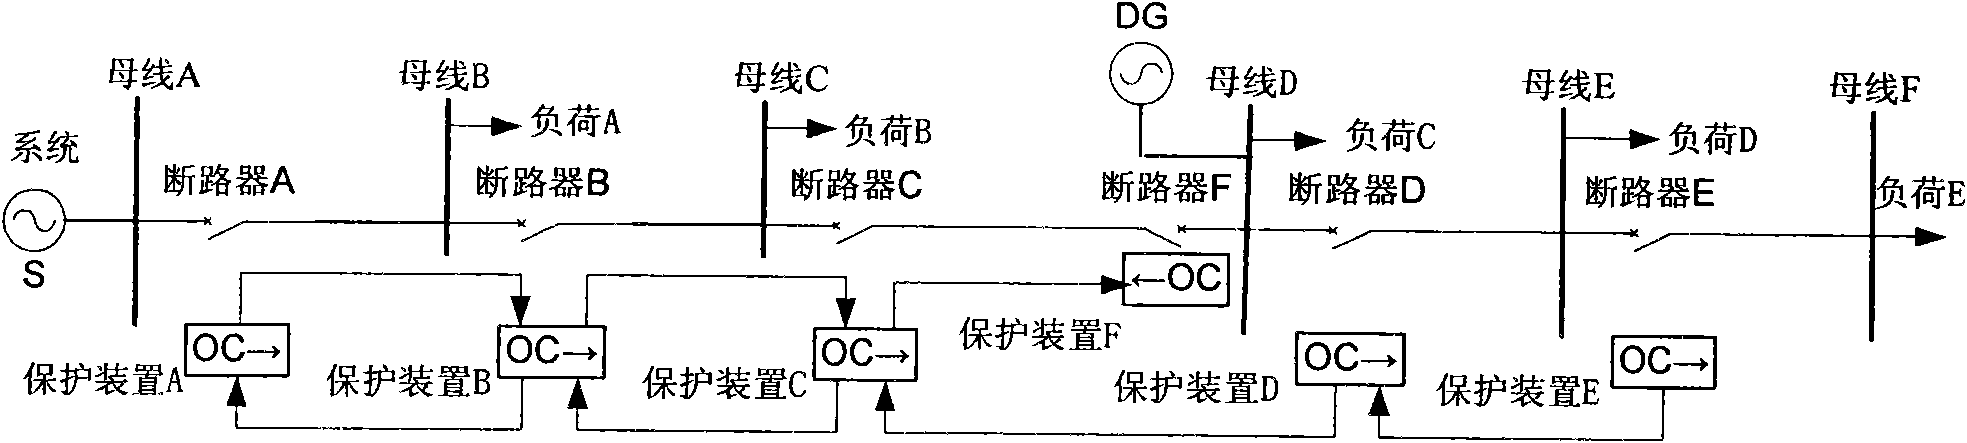 Fast current protection method with channel applicable to distribution networks containing DGs